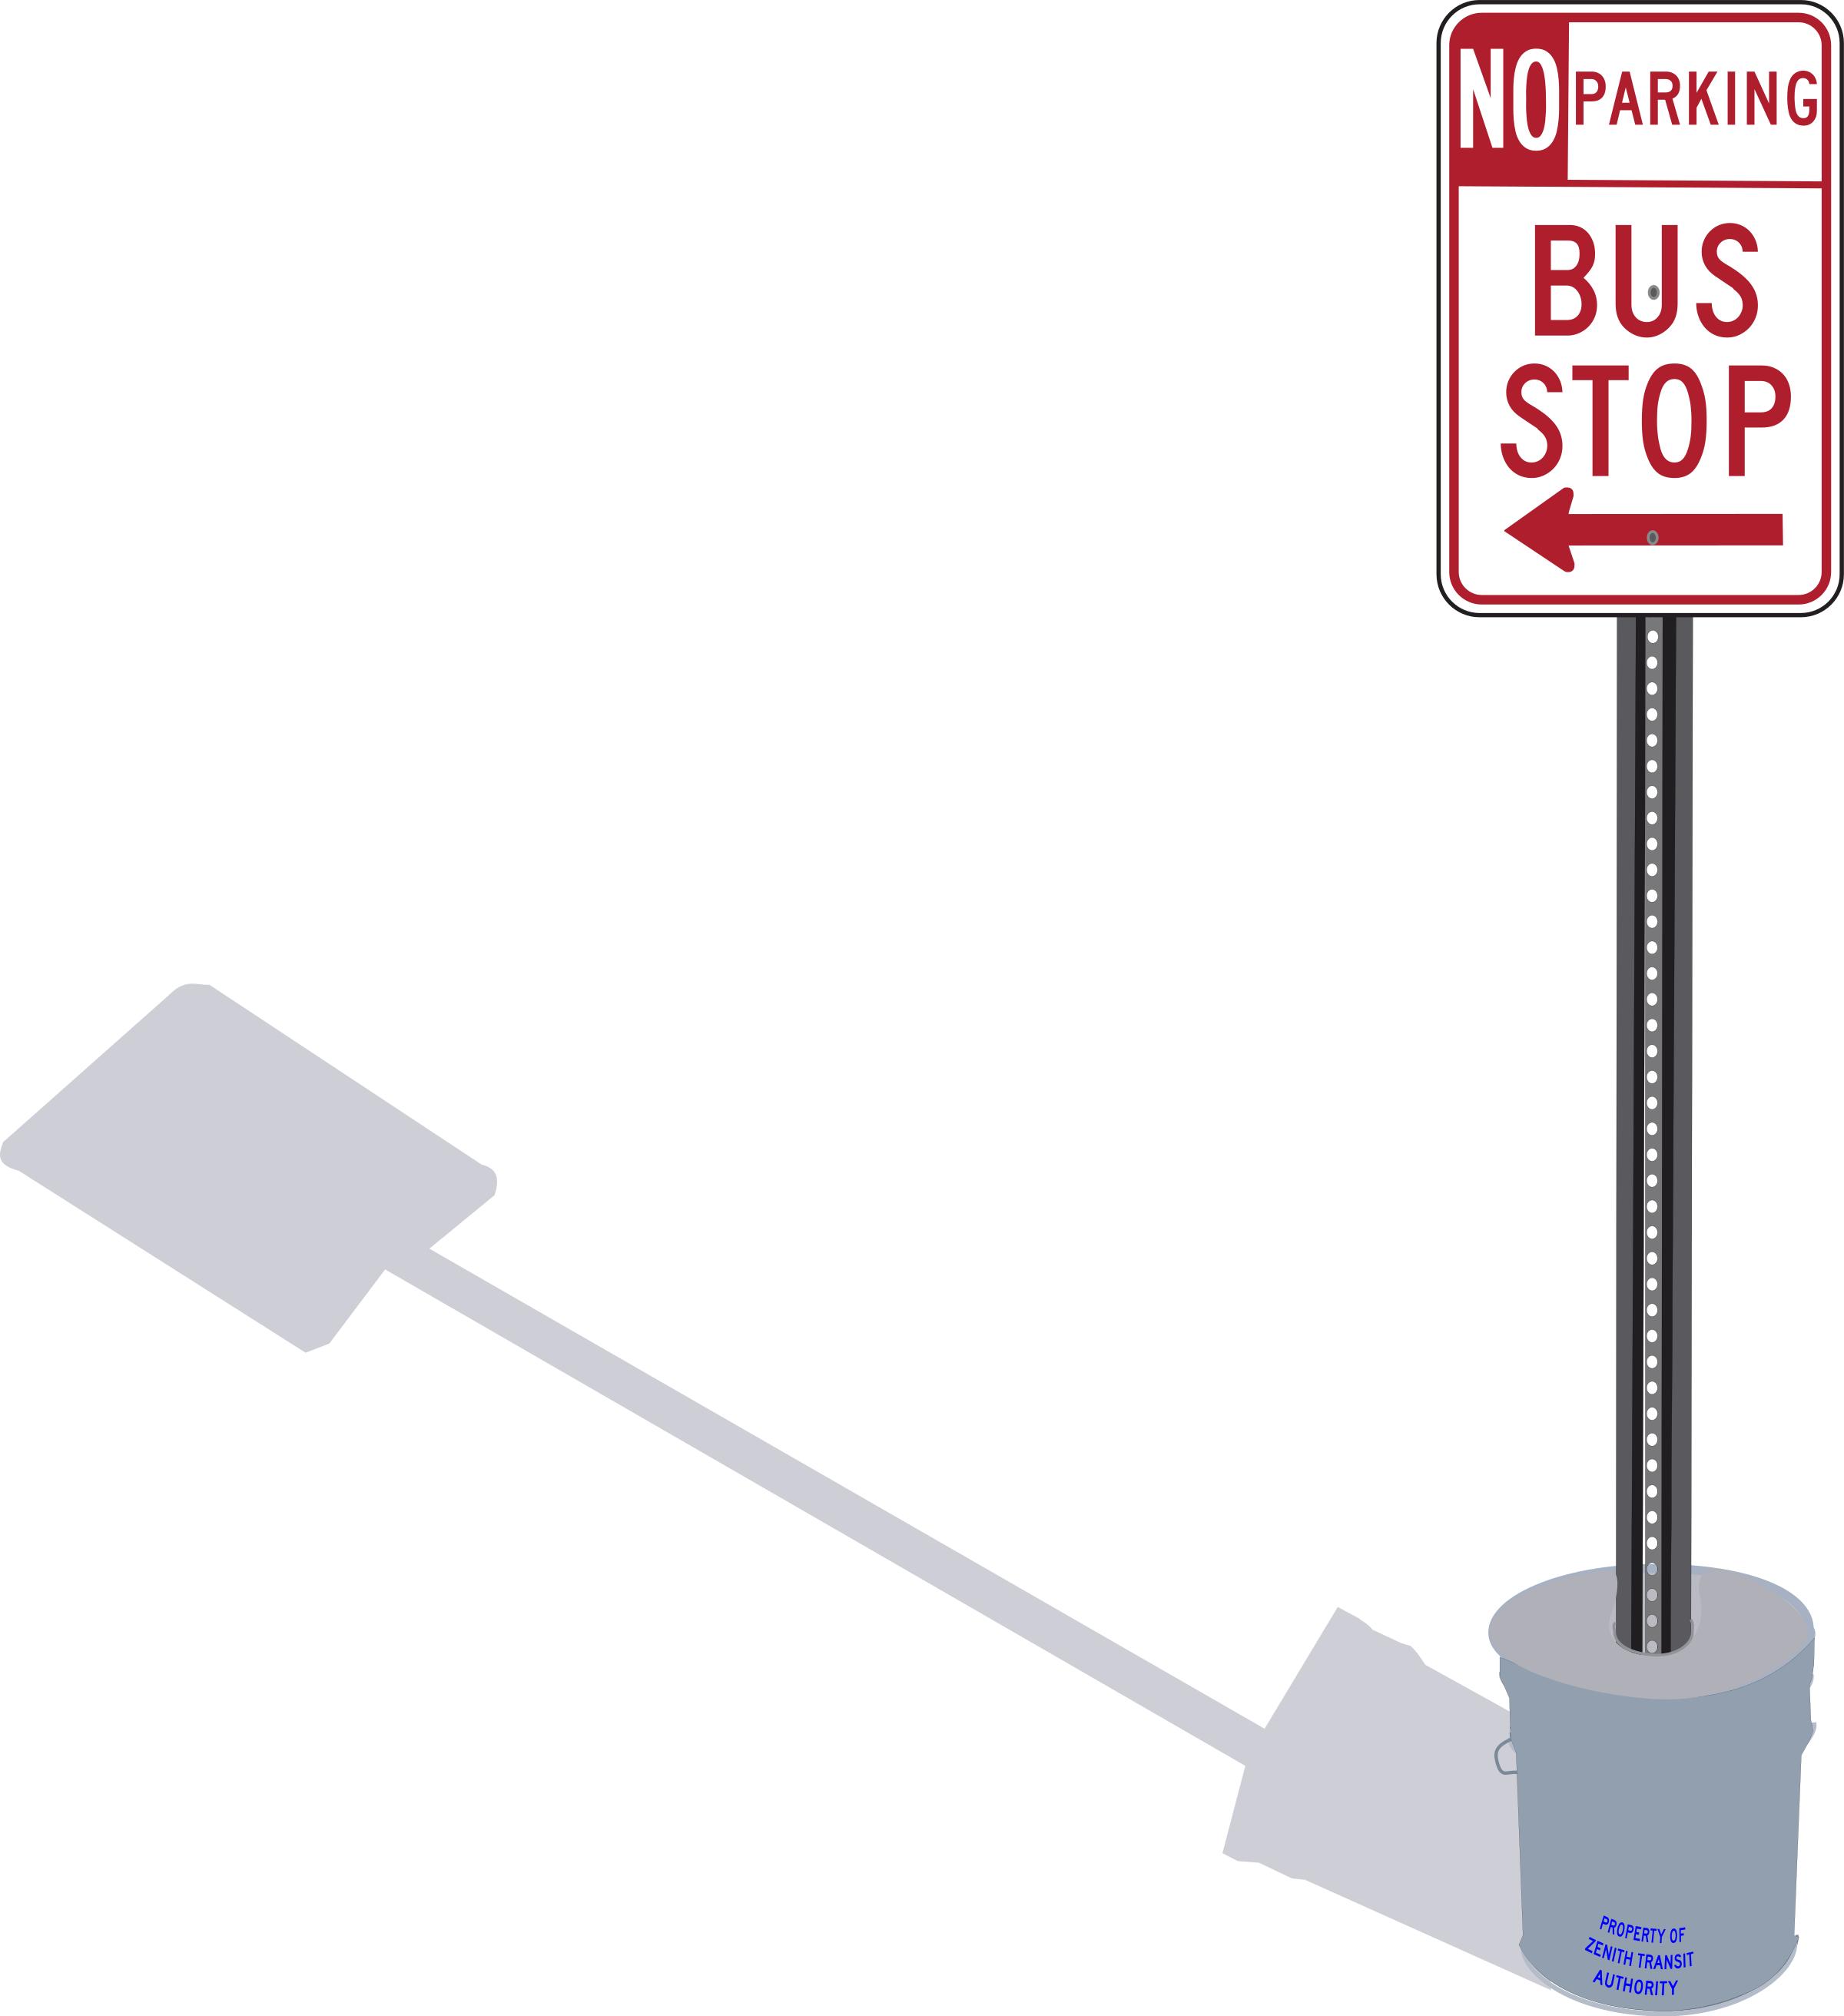 Bus Stop sign in cement pail with shadow png